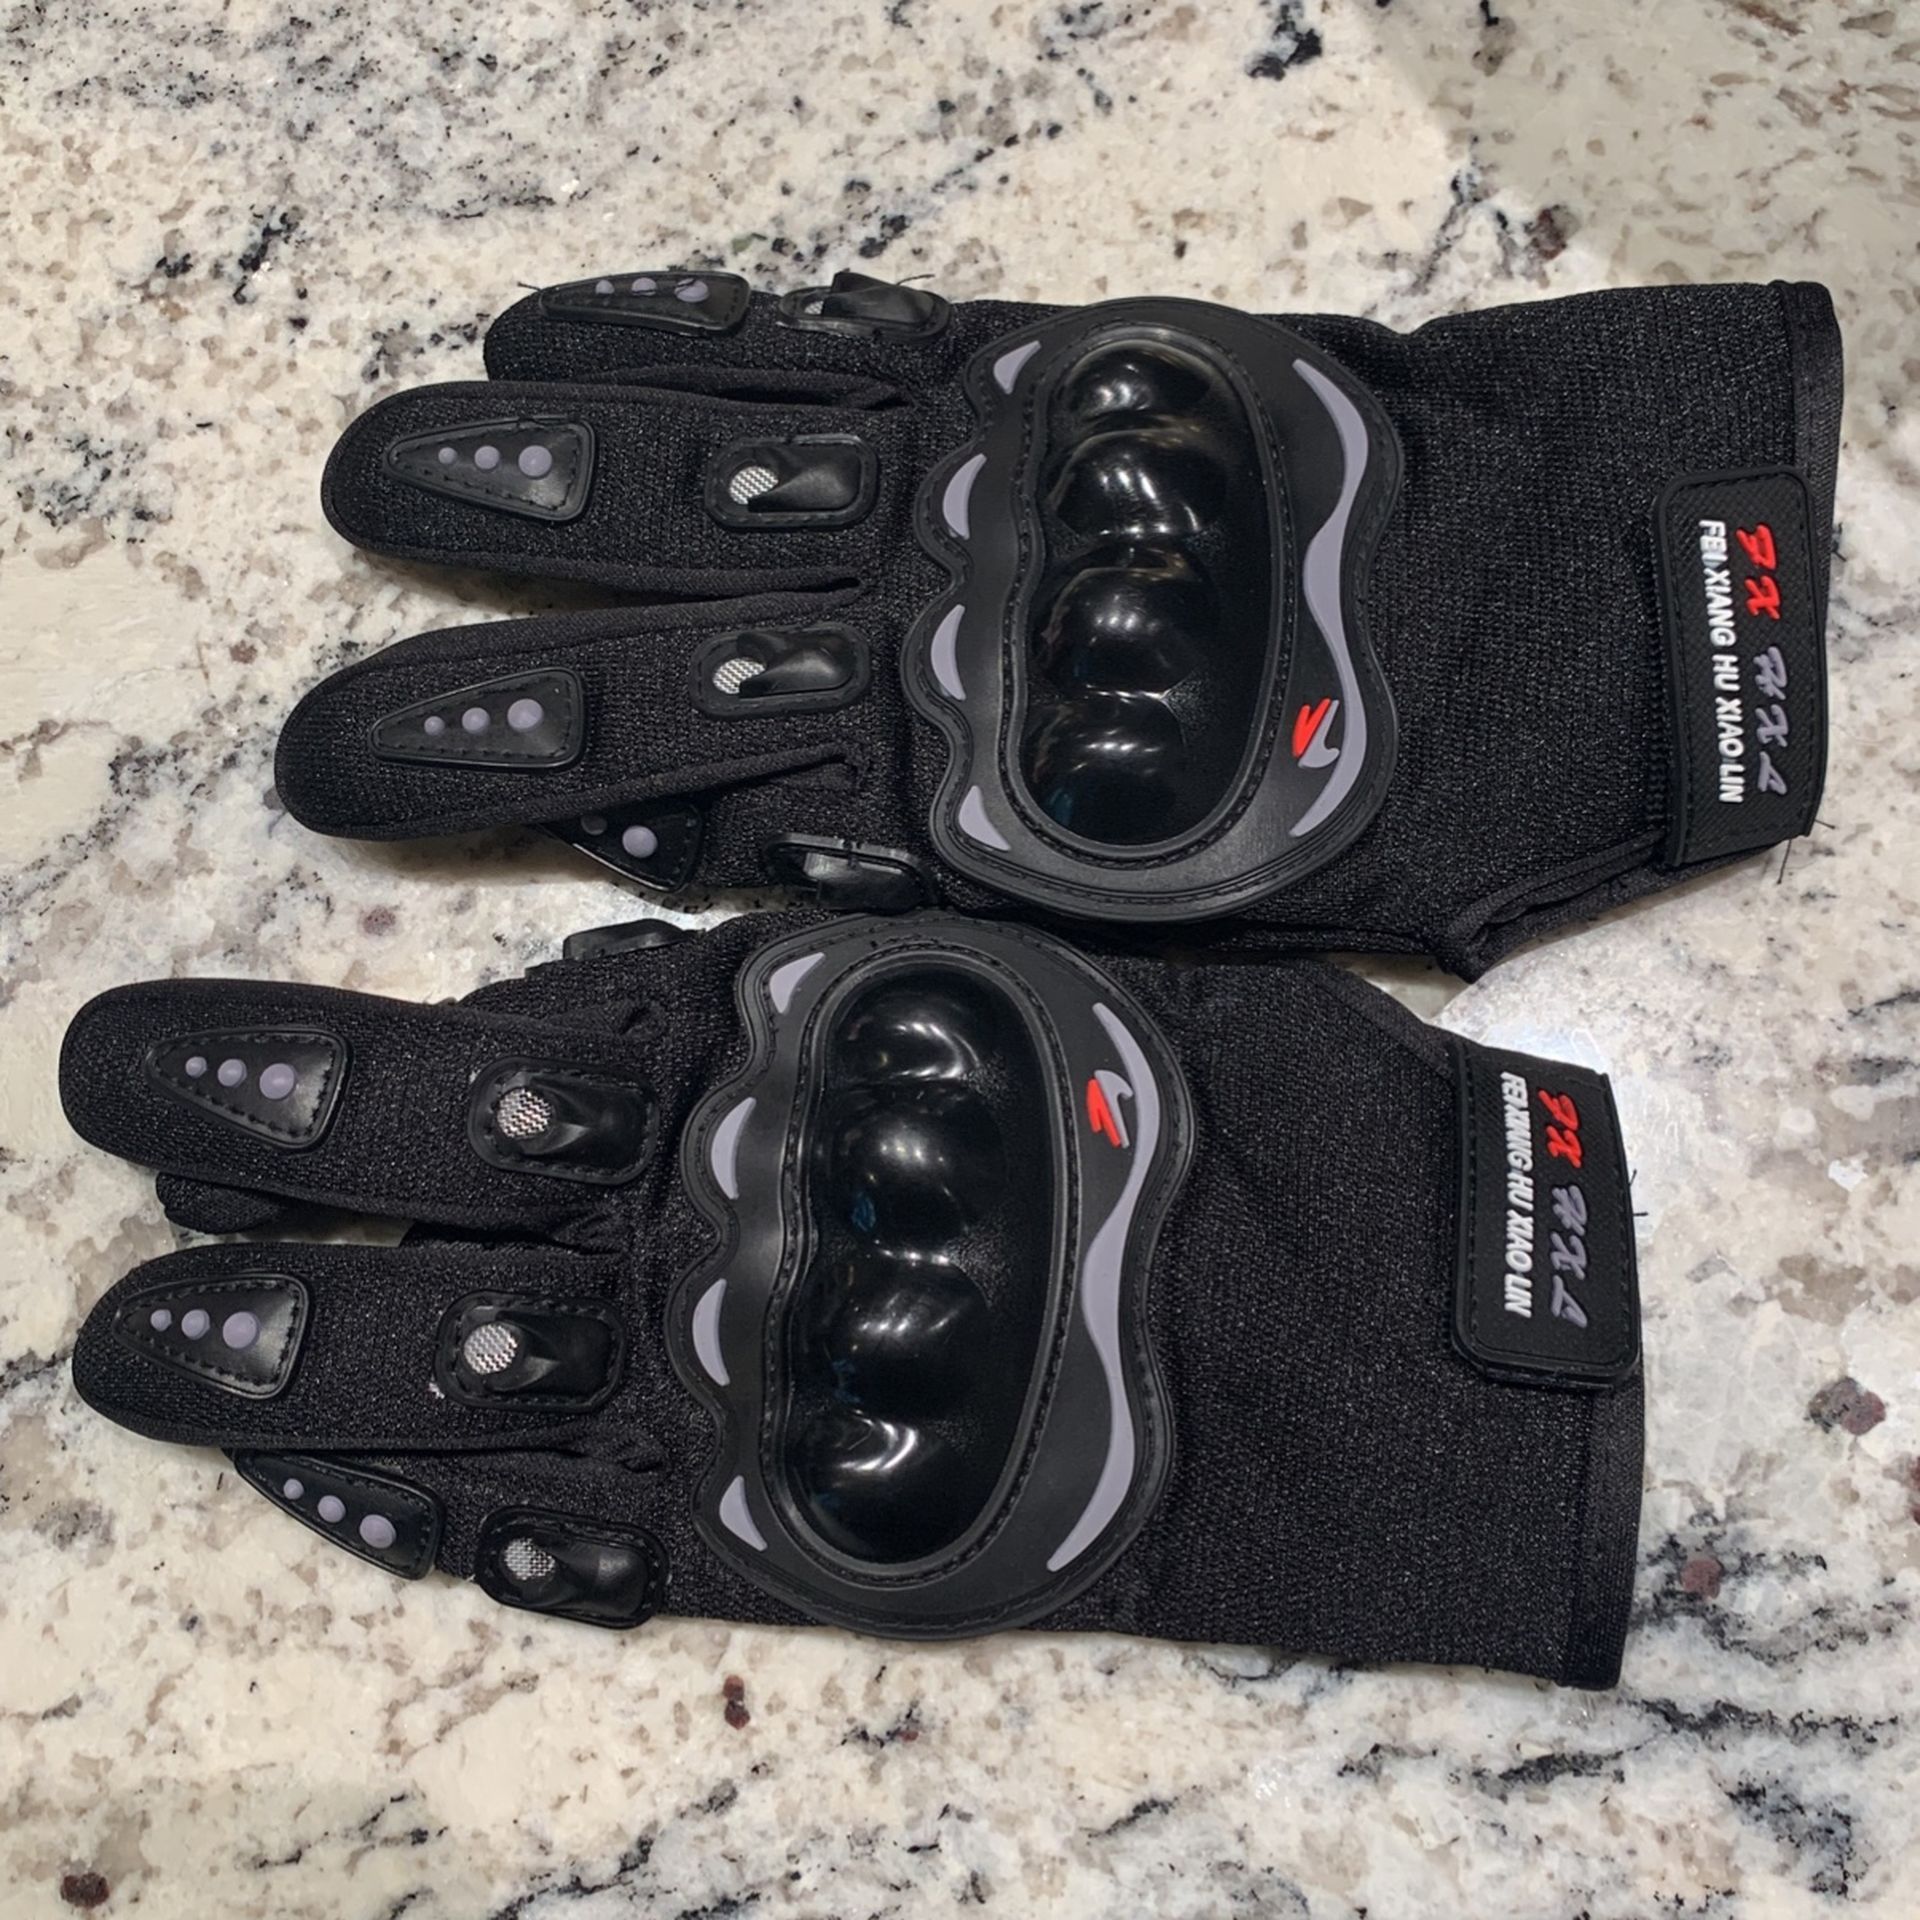 Brand new Motorcycle Gloves